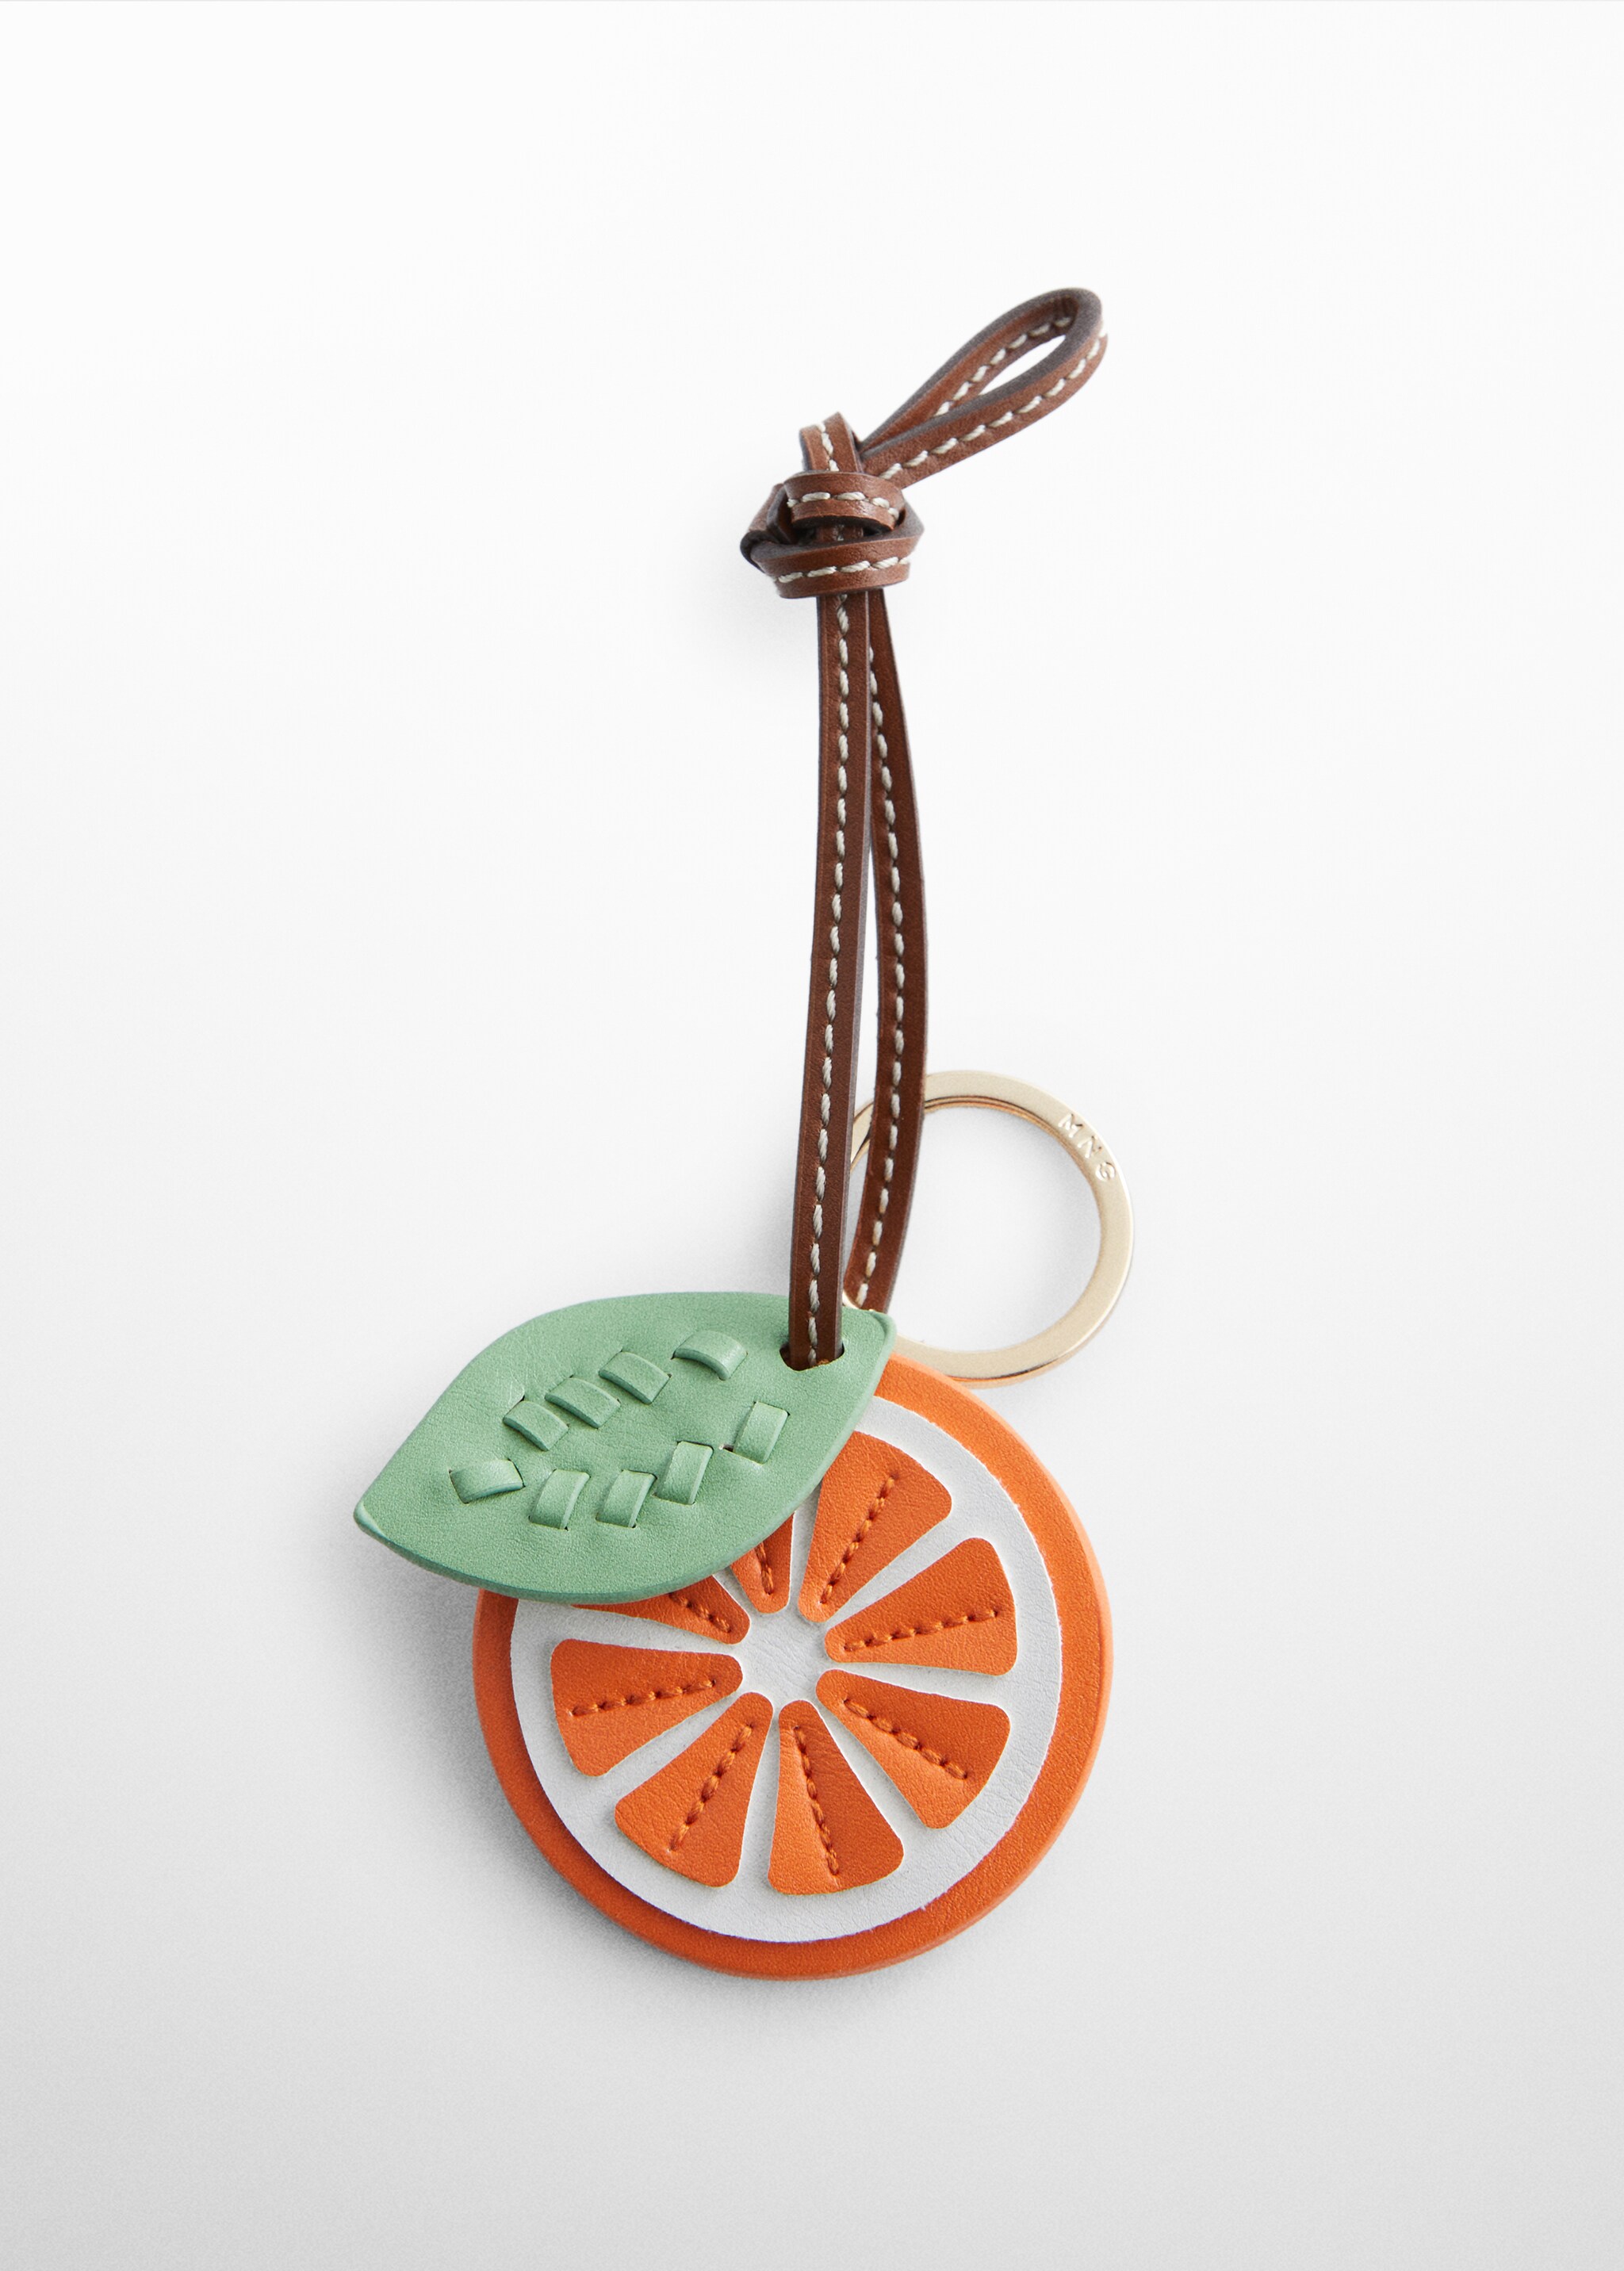 Fruit key ring - Article without model